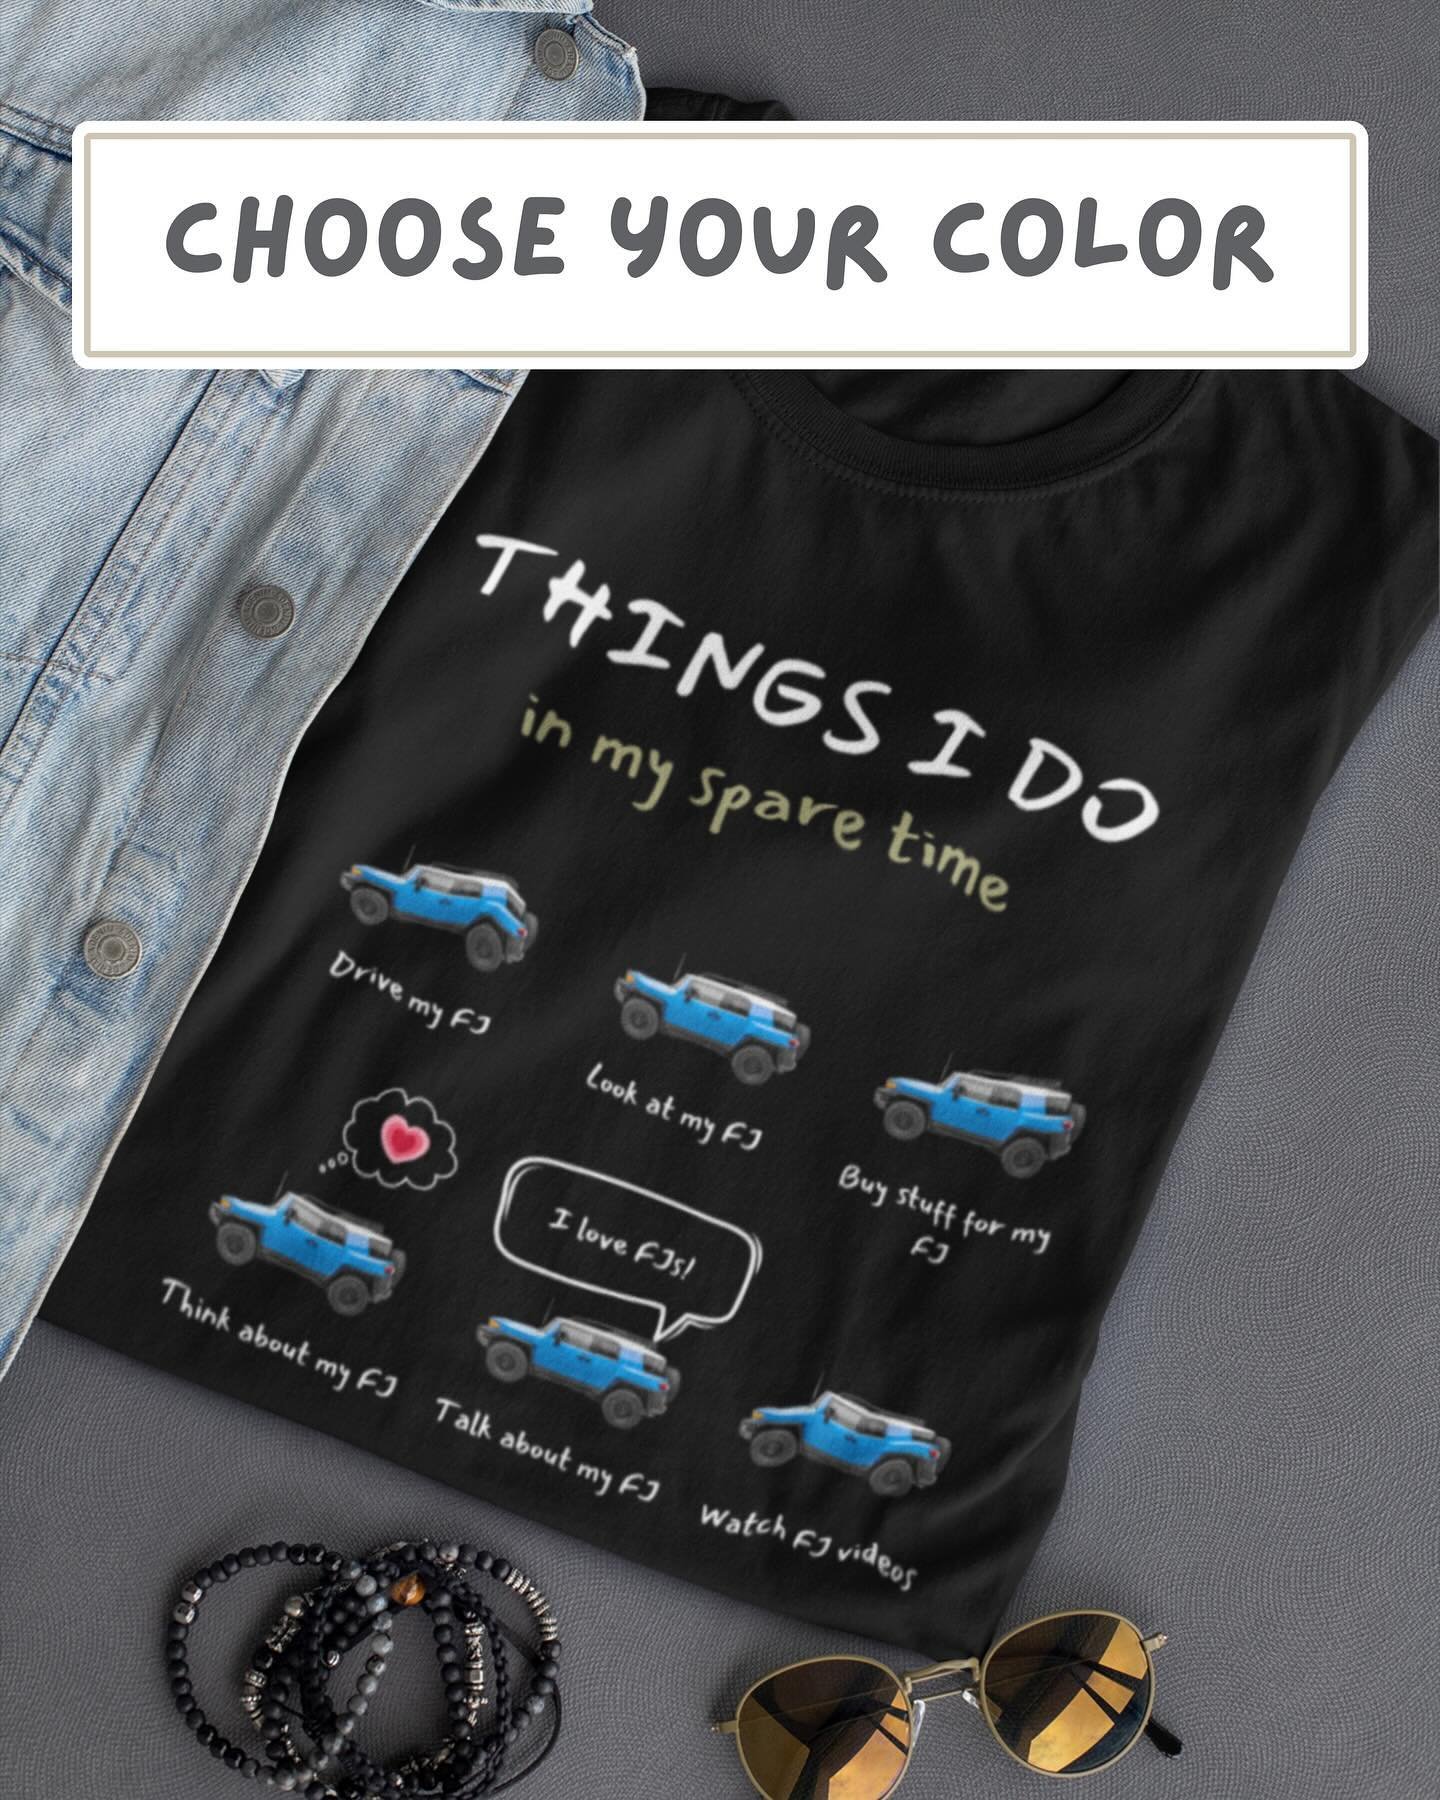 Now our most #popular #tshirts are available in #black #linkinbio #inmysparetime #etsyfinds #love #instagram and #etsysellersofinstagram and #vet #smallbusiness /#smallbusinessowner #instagood #tacoma #jeep #fjcruiser #aquarium #dogs #miata #boosted 